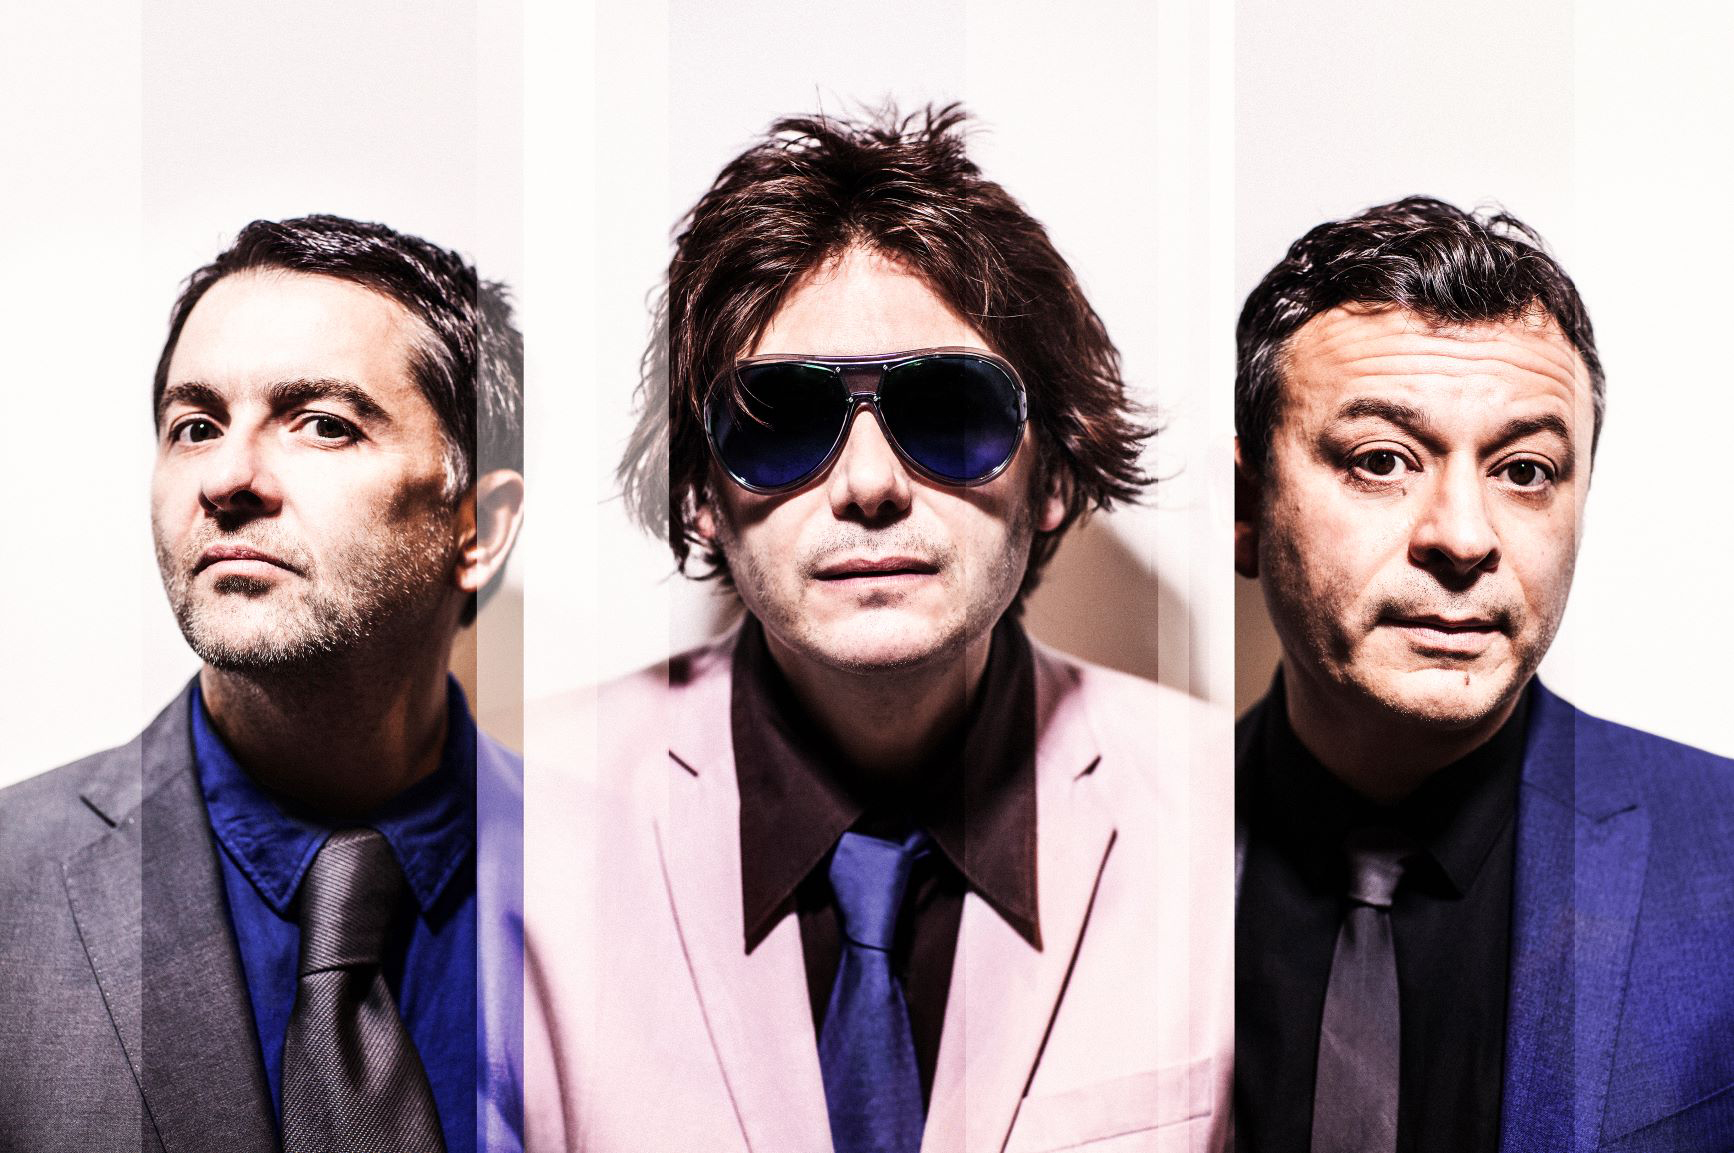 MANIC STREET PREACHERS change dates of Cardiff shows paying tribute to NHS staff 